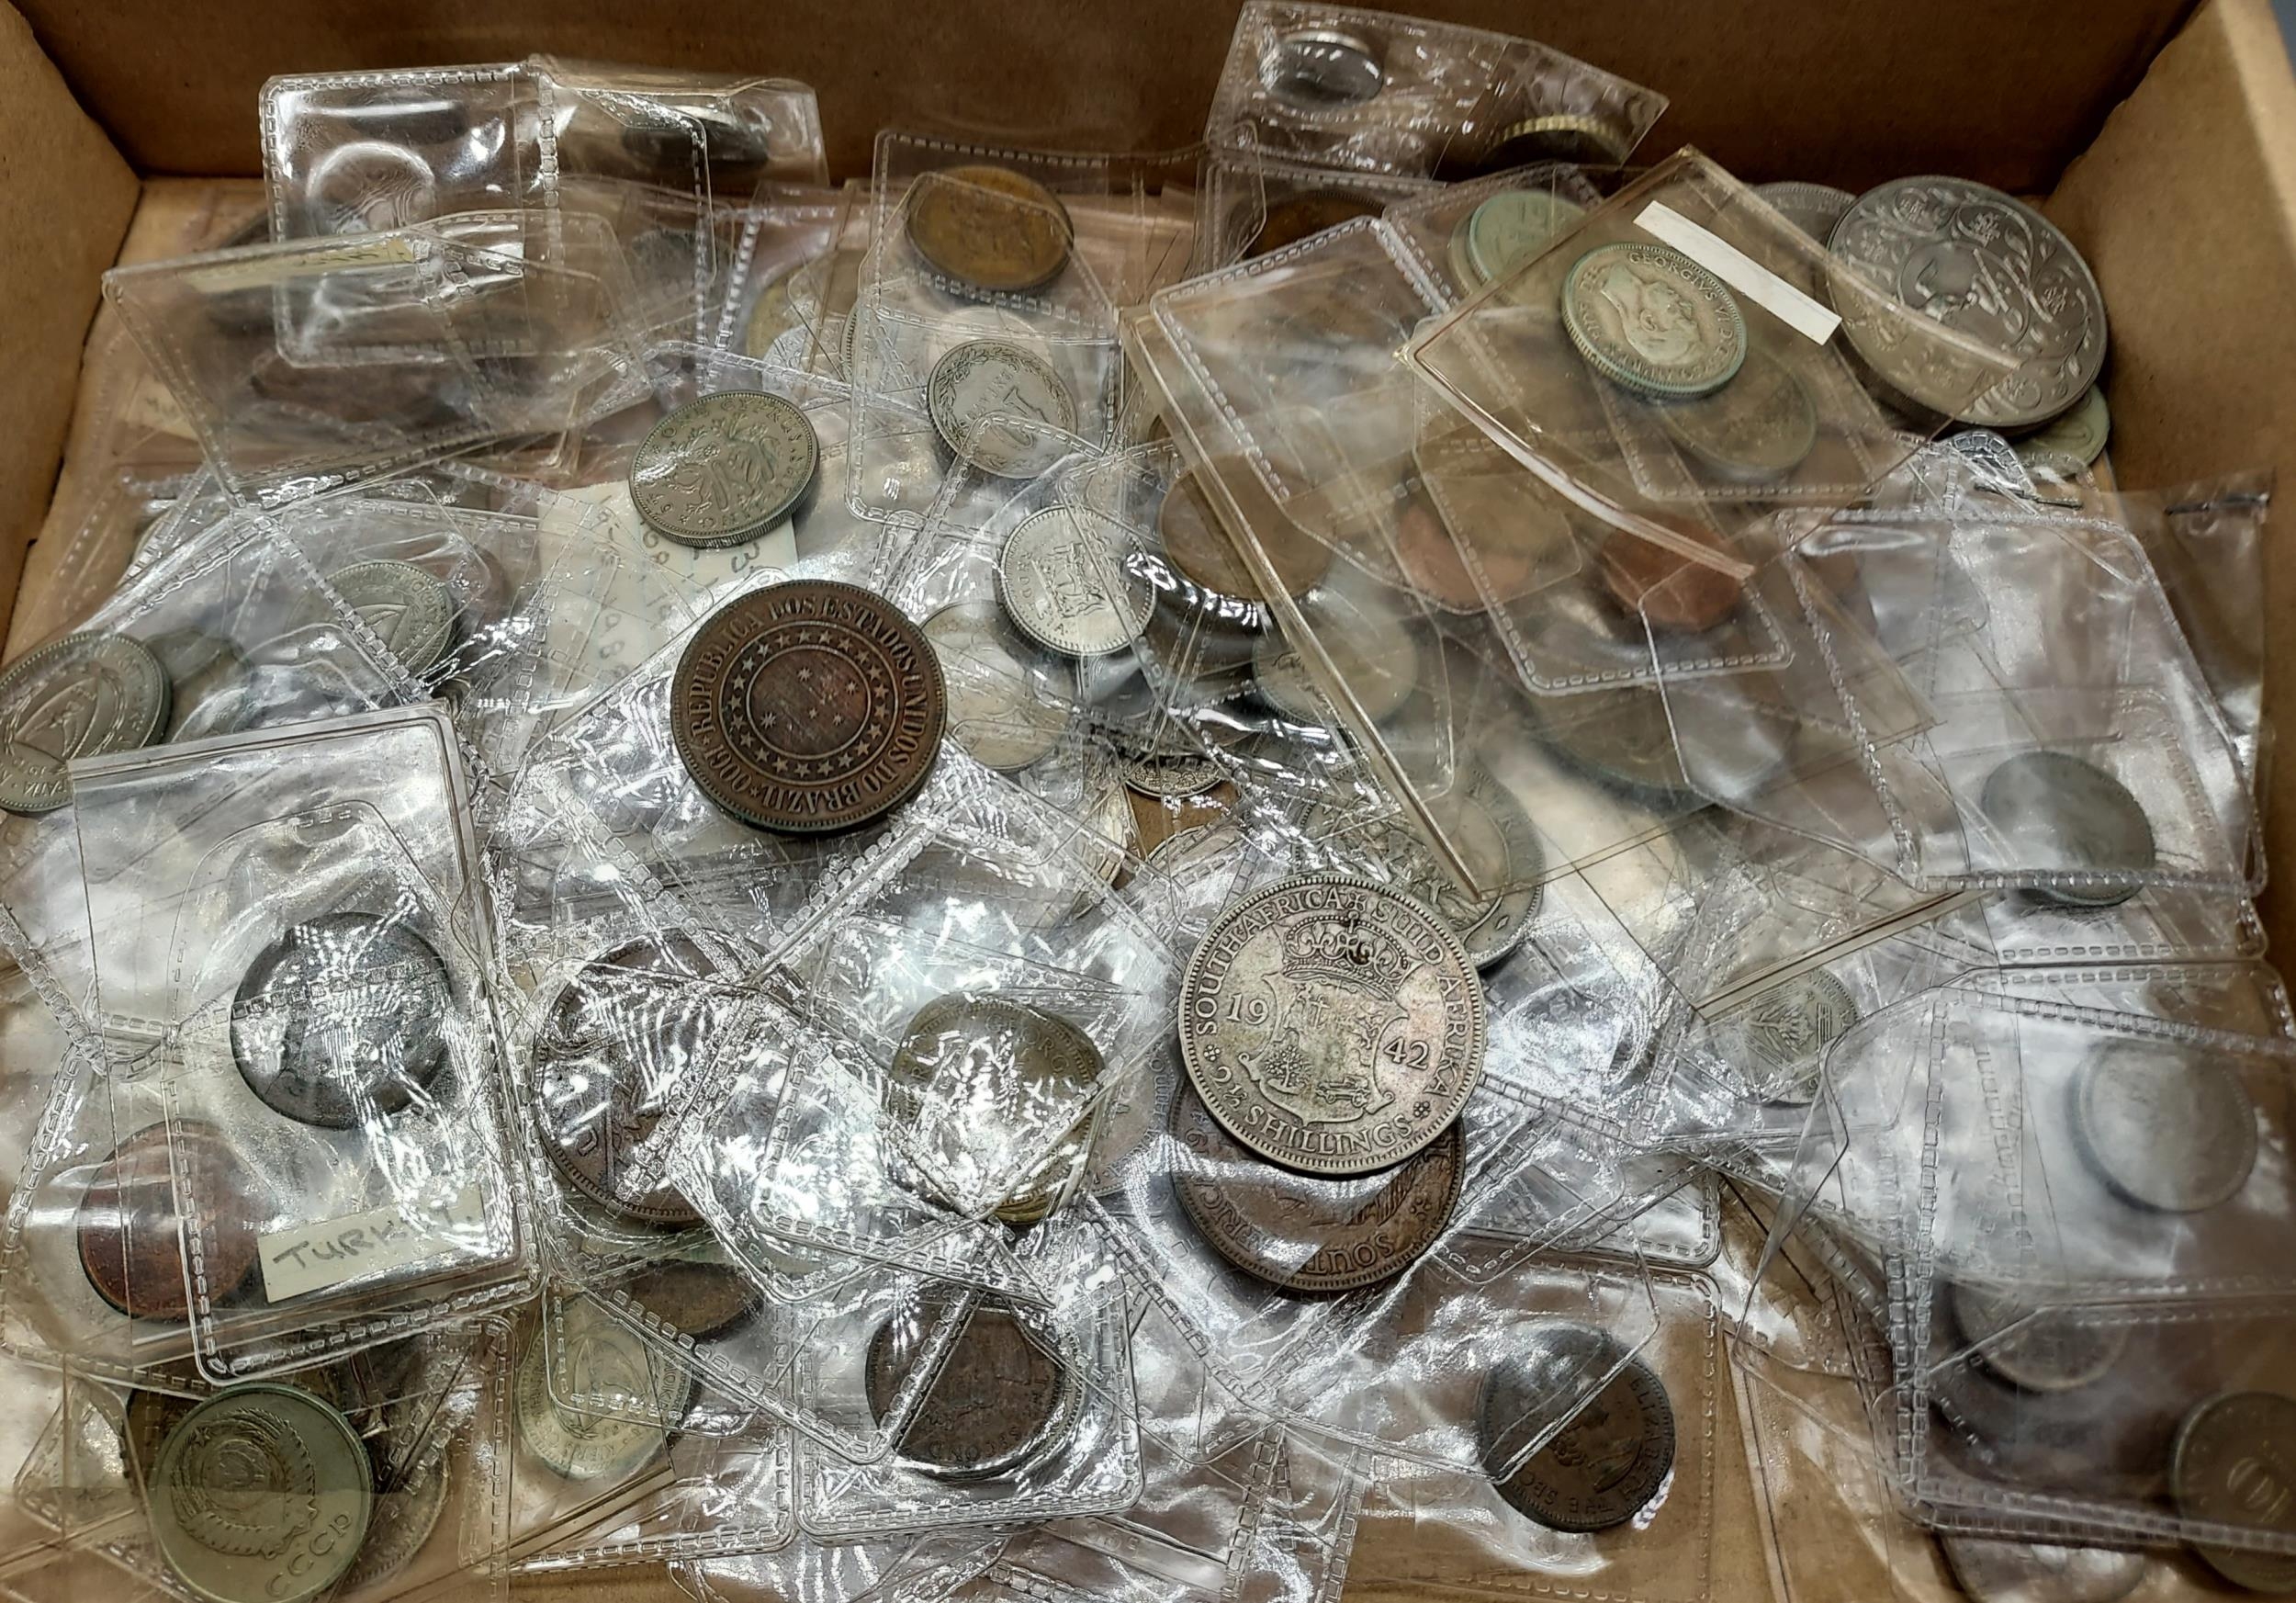 A Box containing a quantity of antique and vintage coinage includes various silver coins and foreign